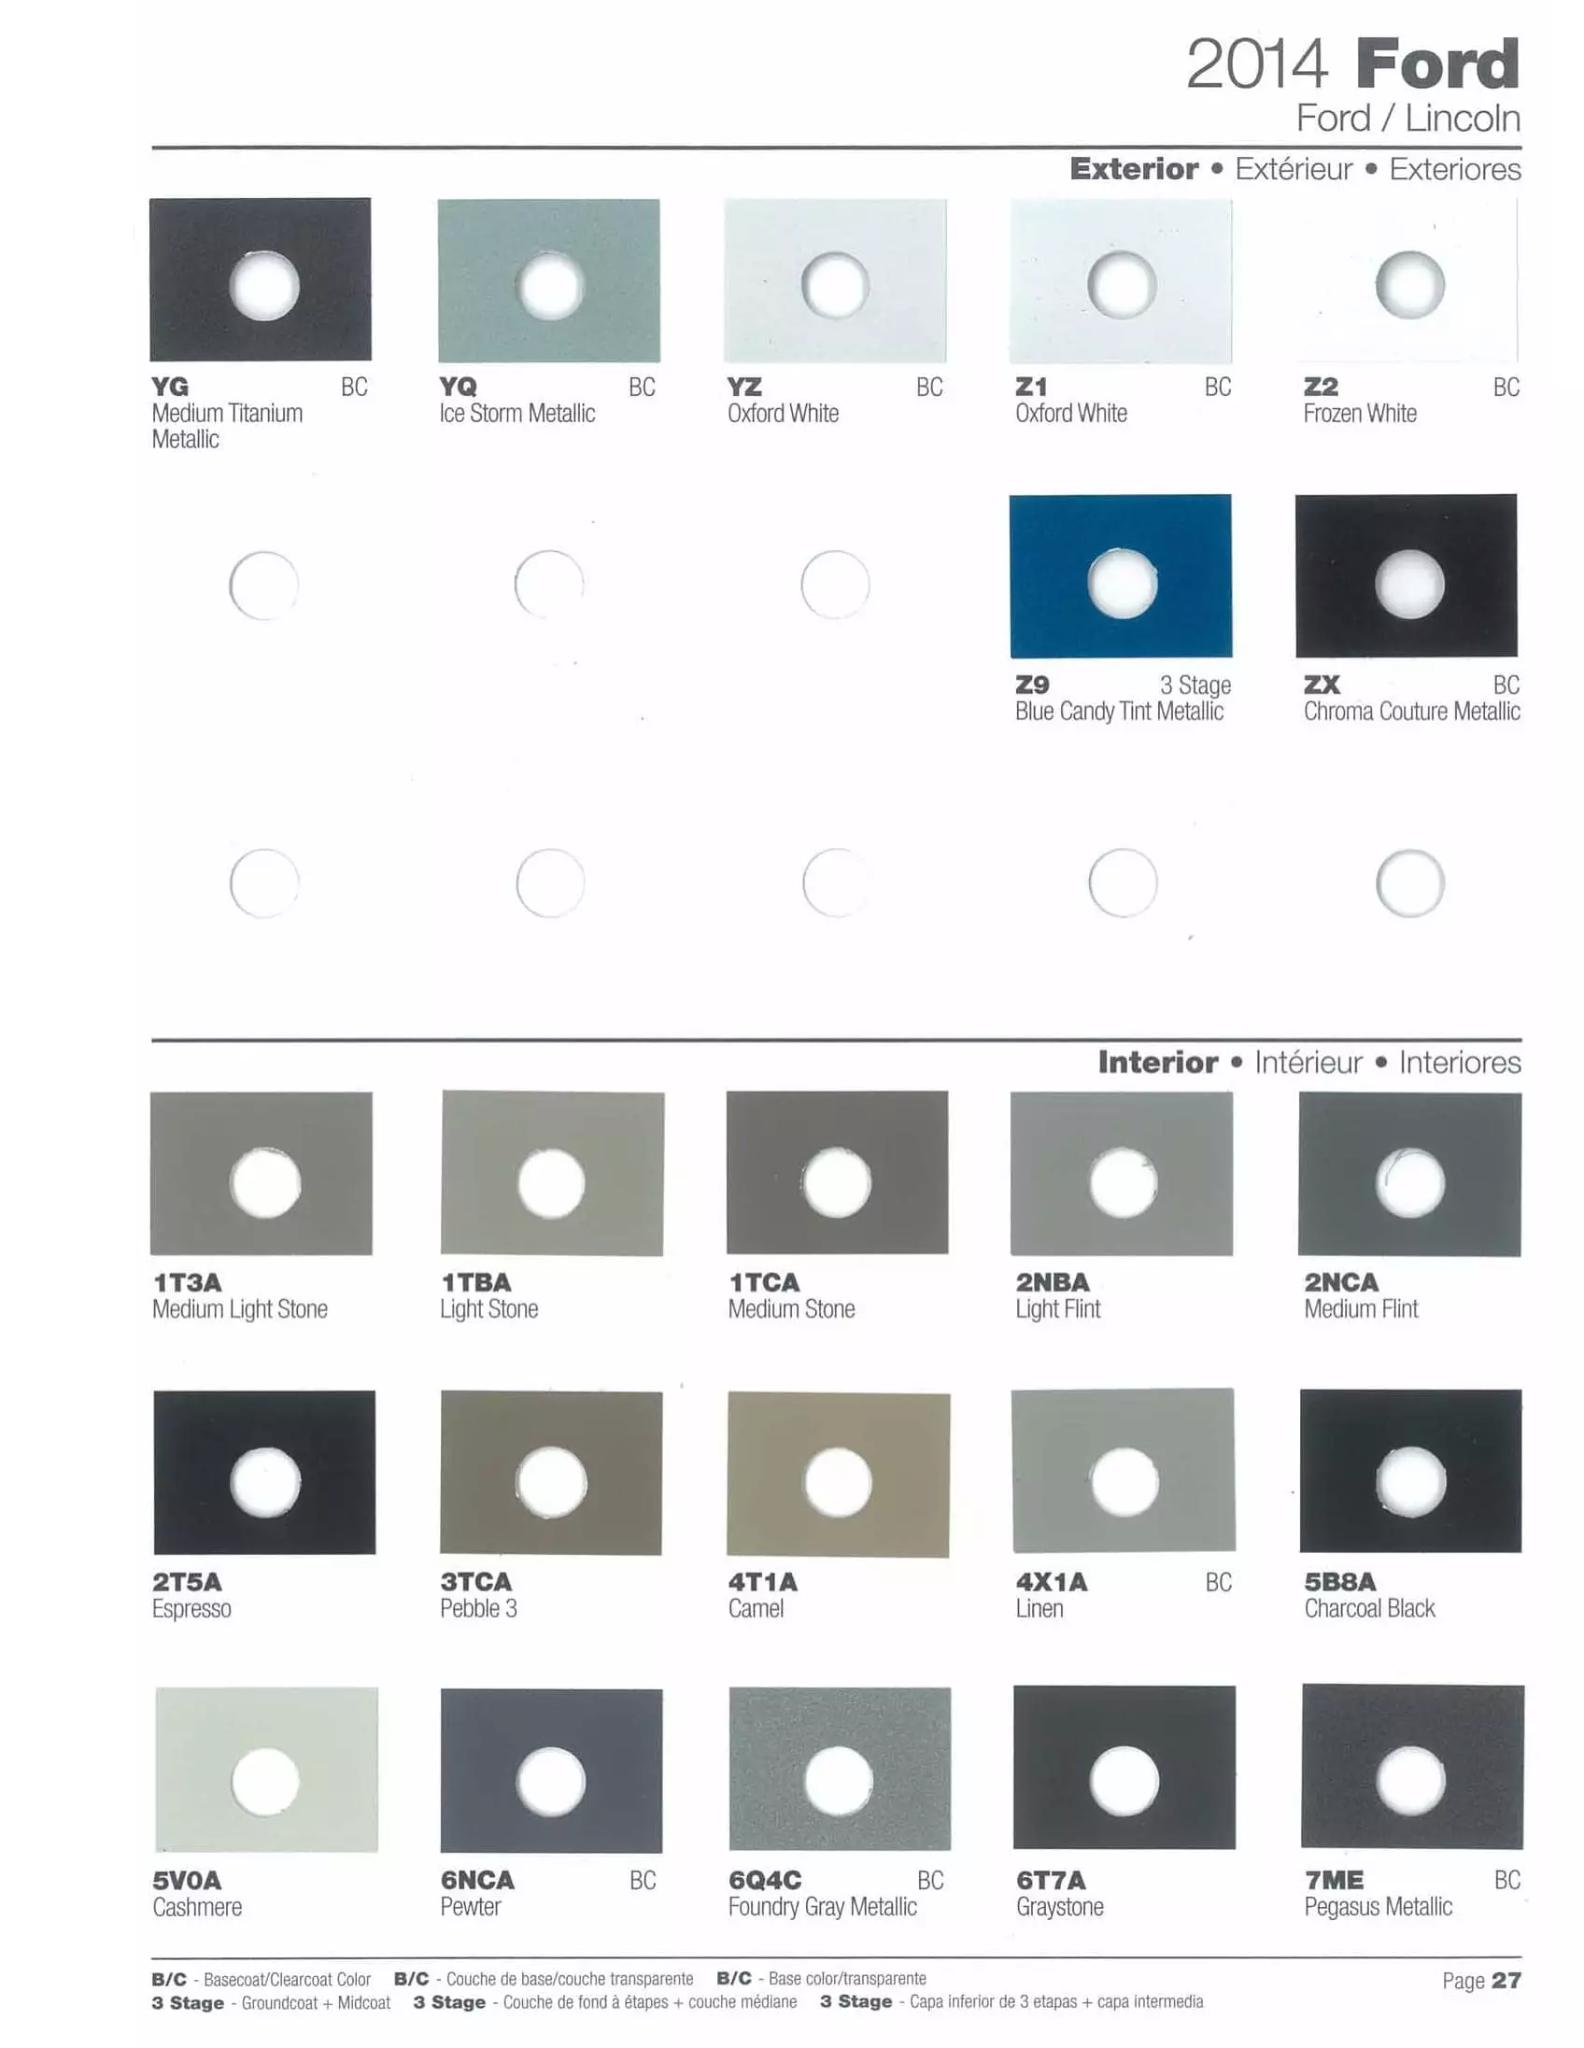 Paint codes, and their ordering stock numbers for their color on 2014 vehicles